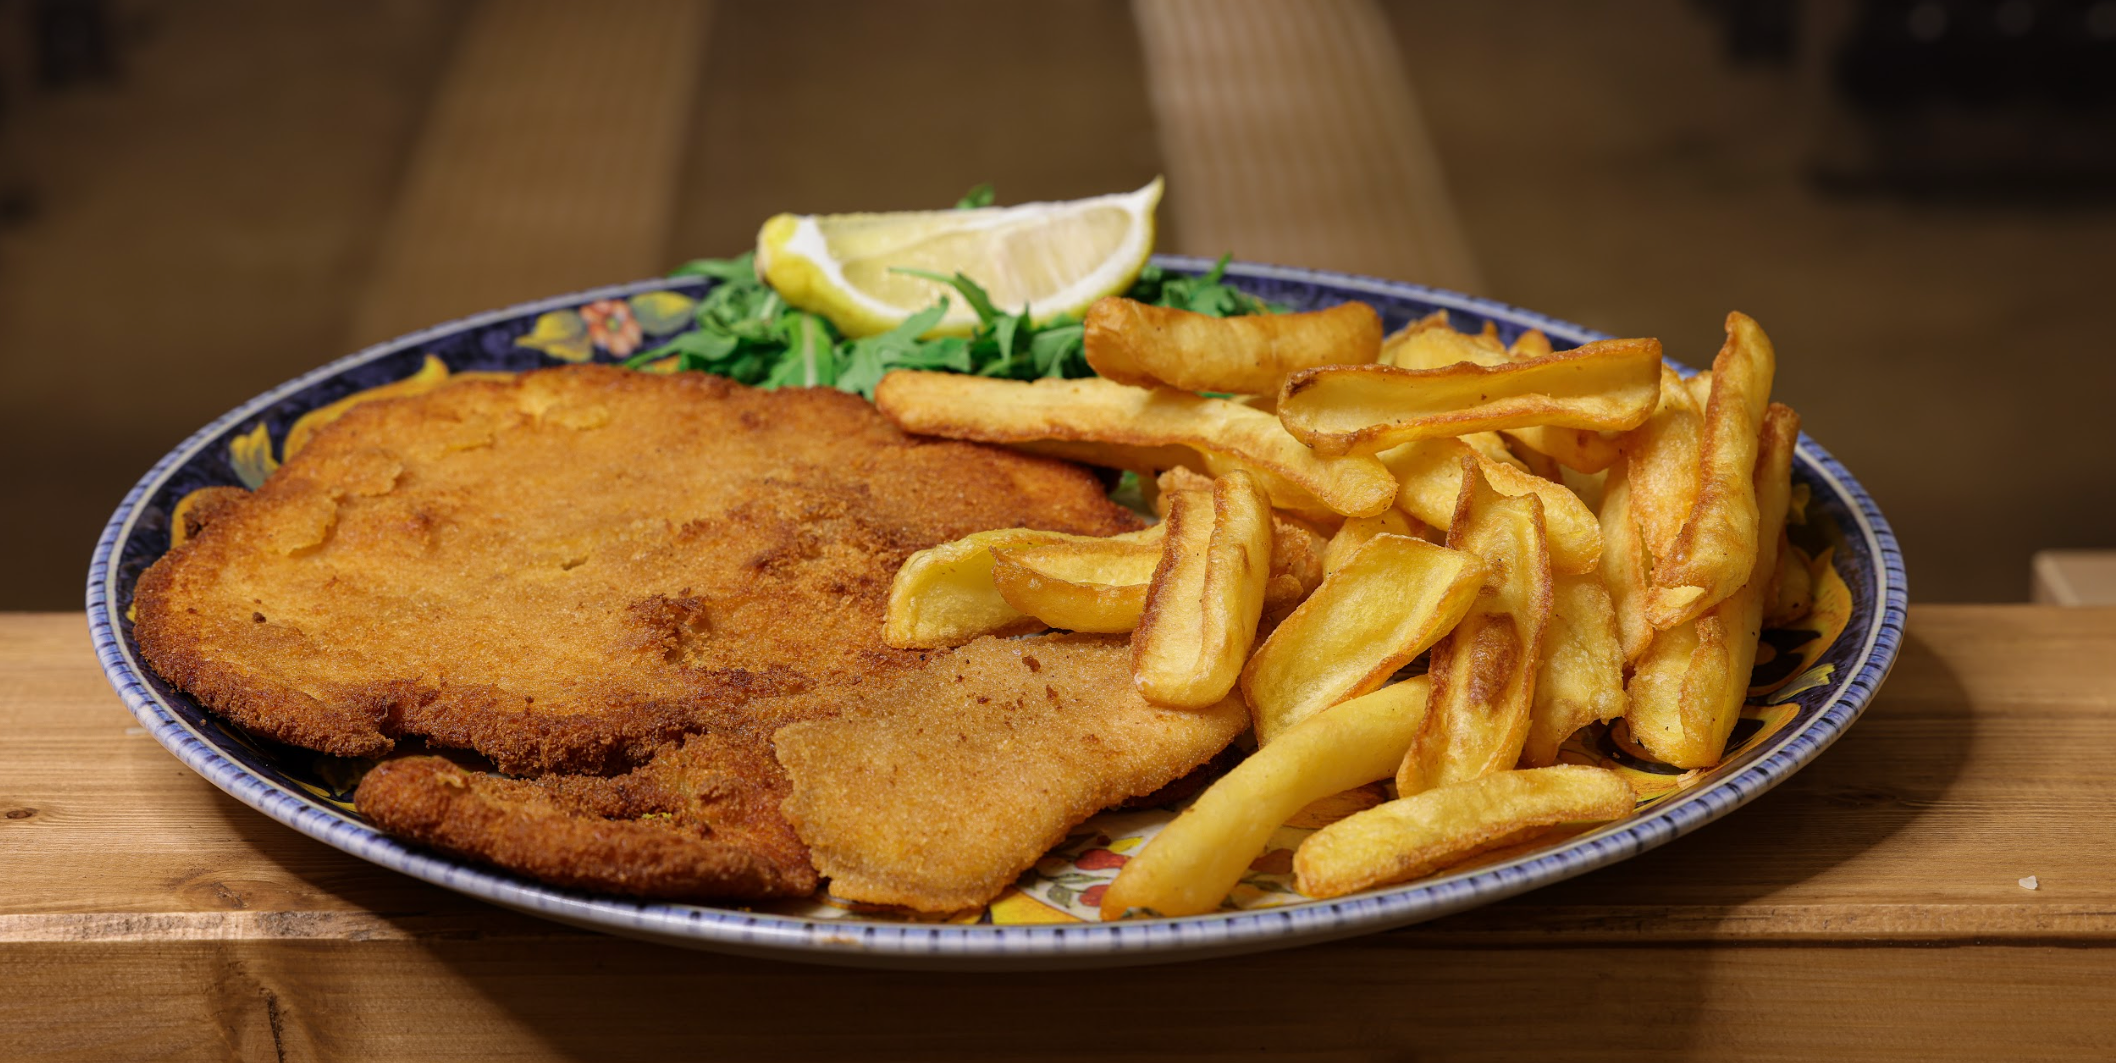 Veal Milanese and fries